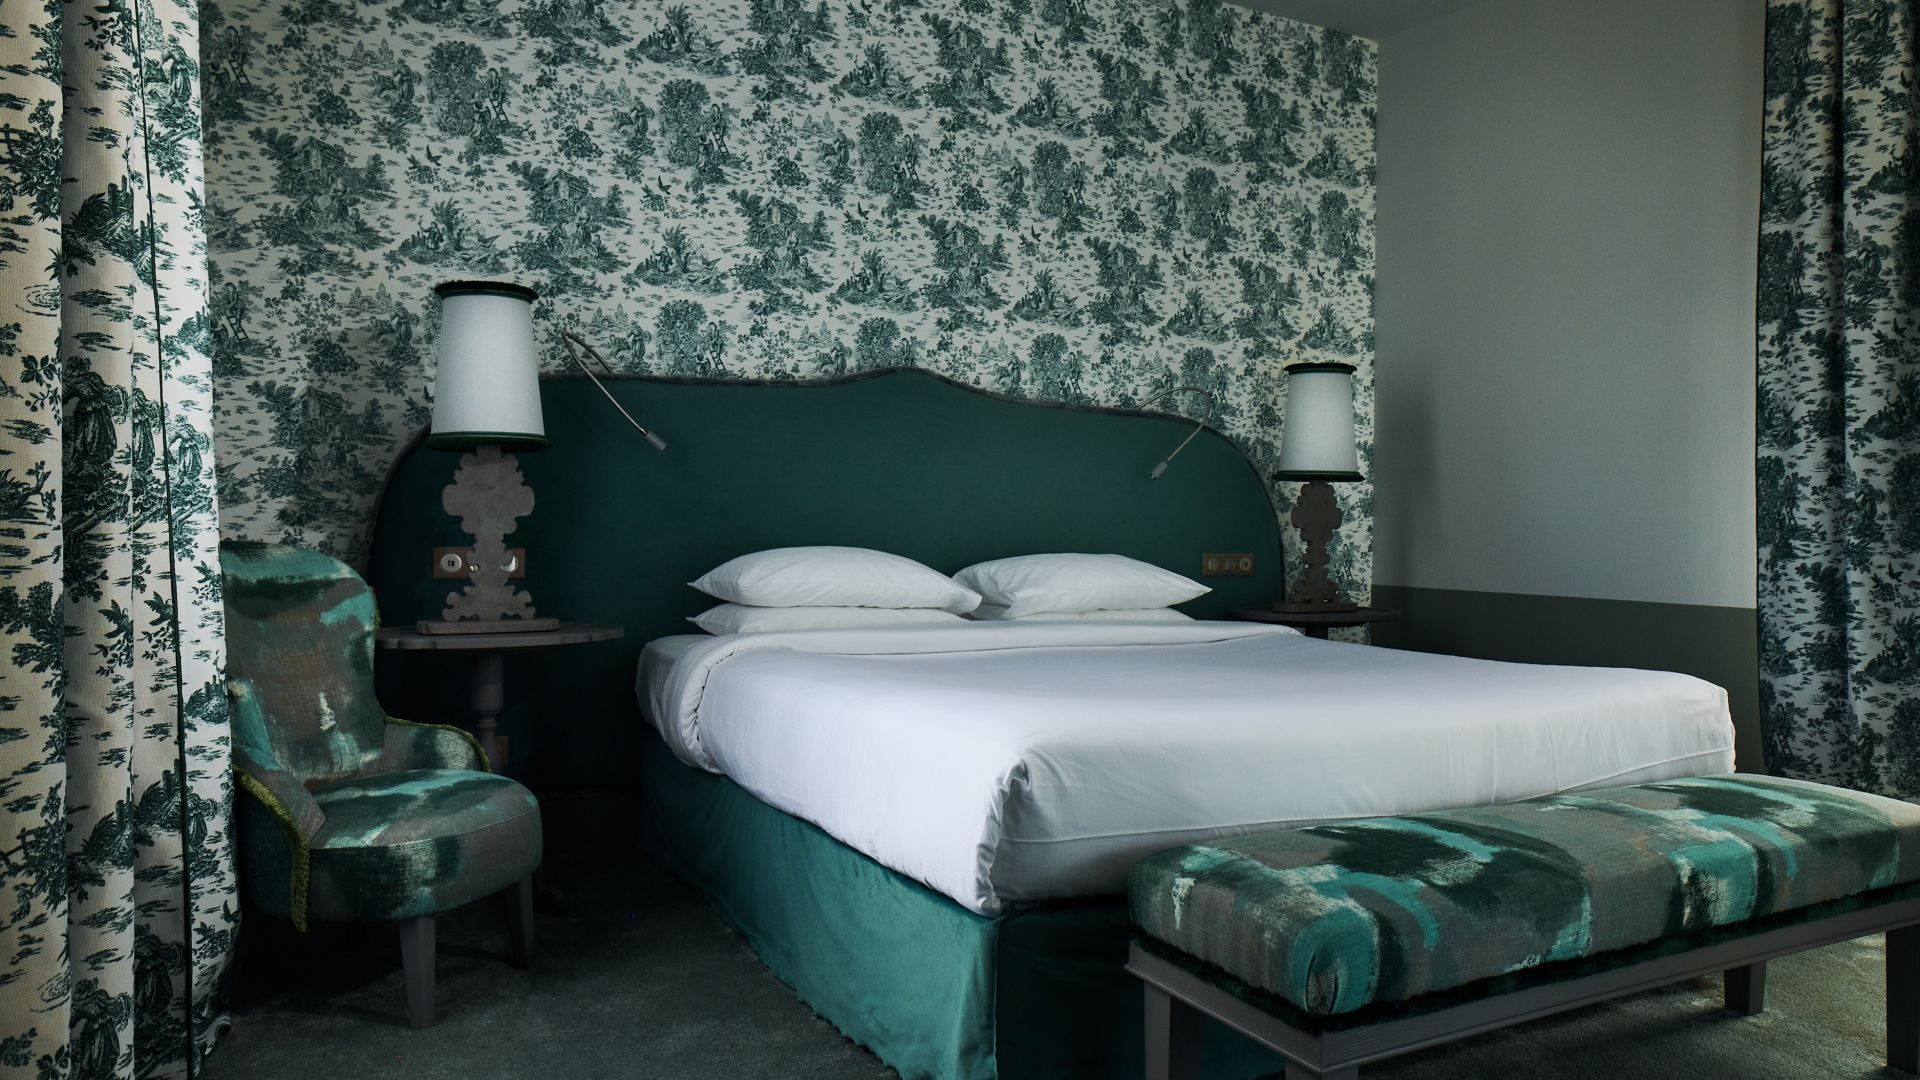 A Bed With A Green Headboard - Image